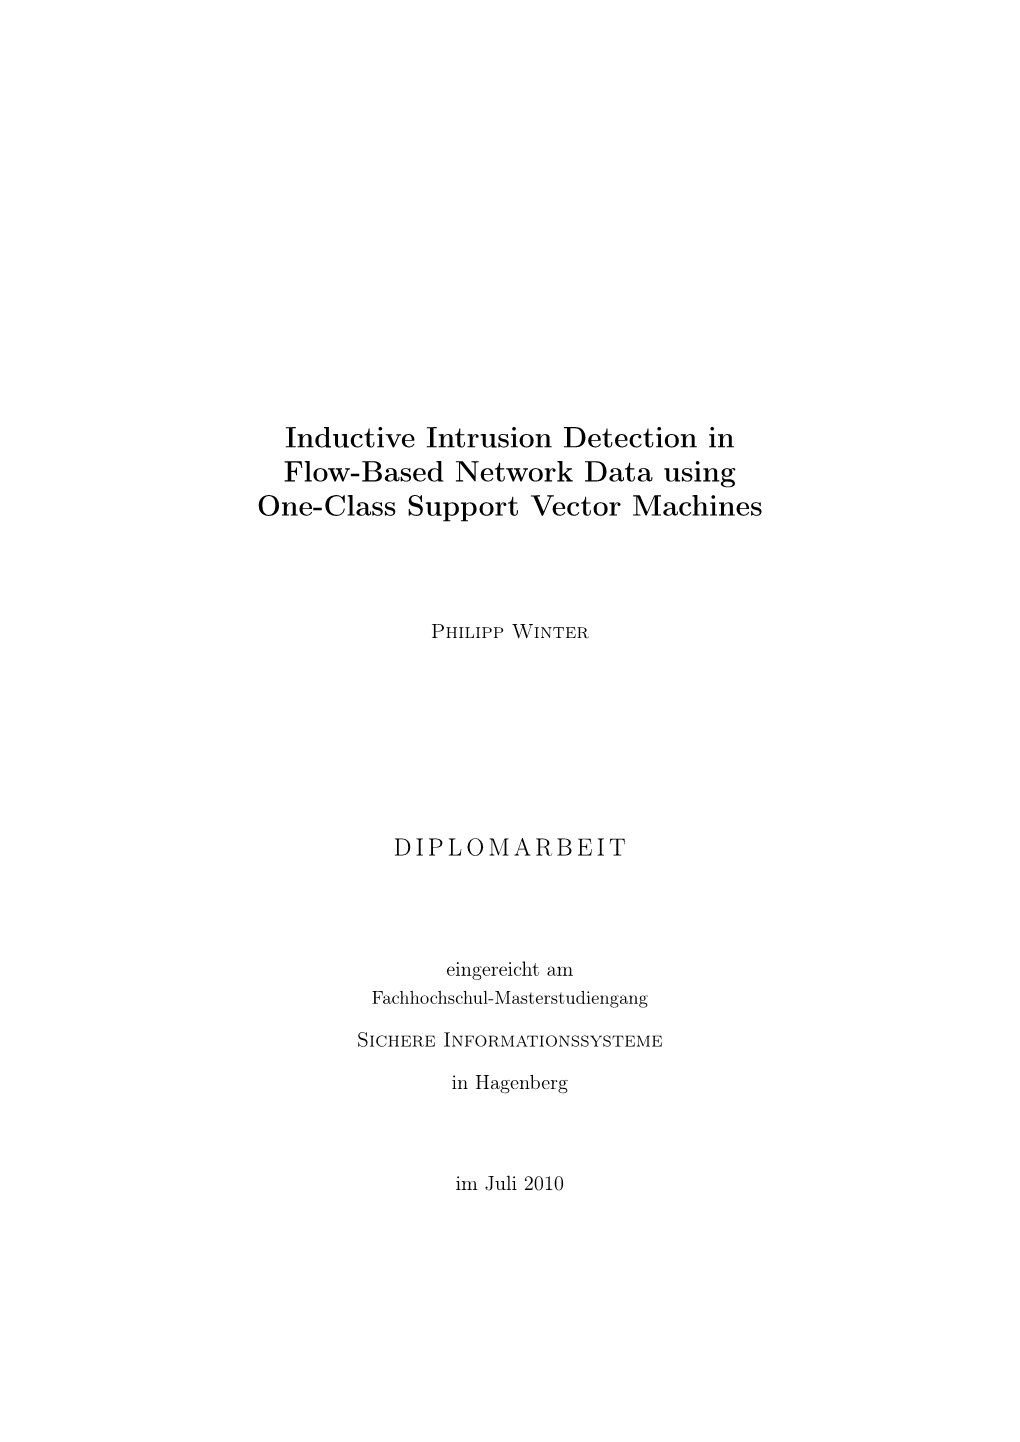 Inductive Intrusion Detection in Flow-Based Network Data Using One-Class Support Vector Machines